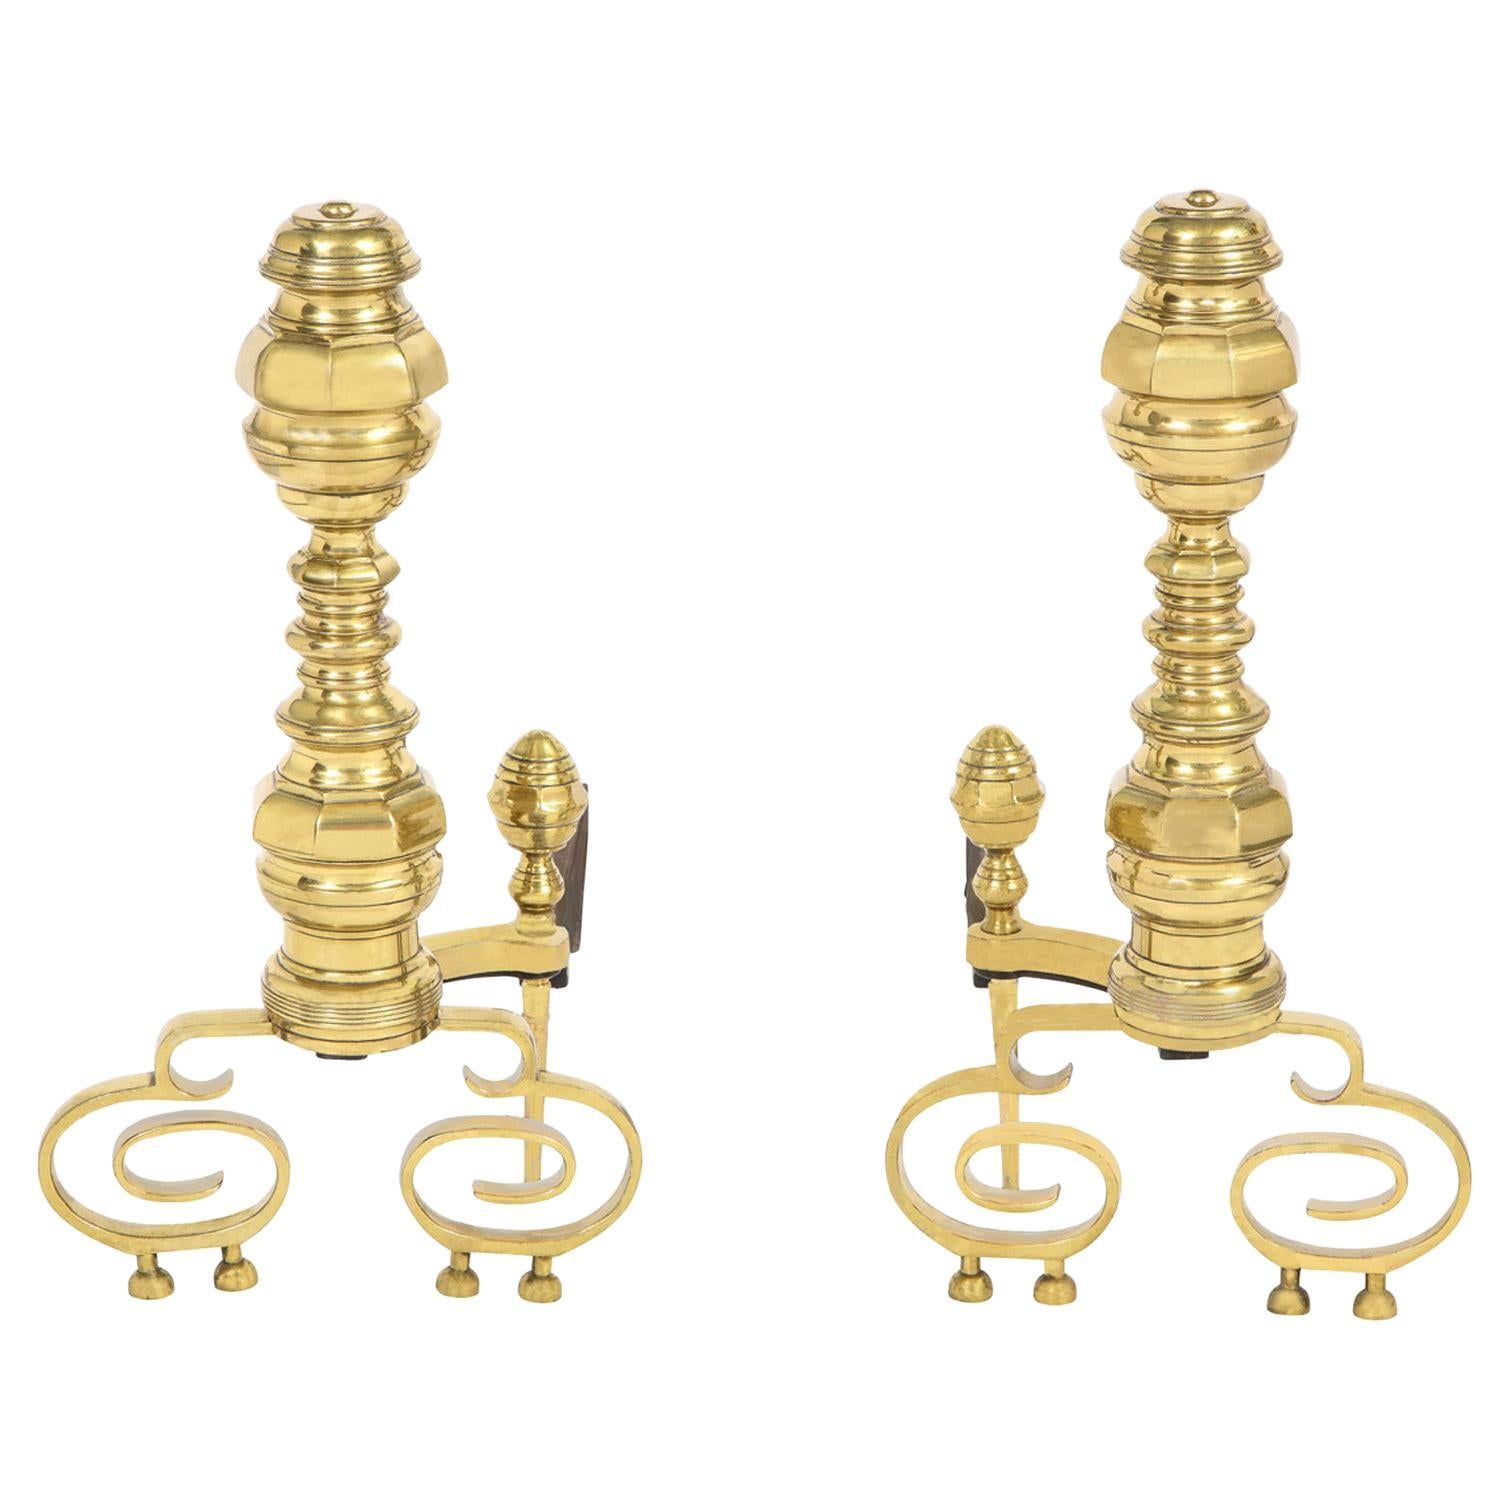 Pair of Artisan Andirons in Polished Brass and Wrought-Iron, 1970s